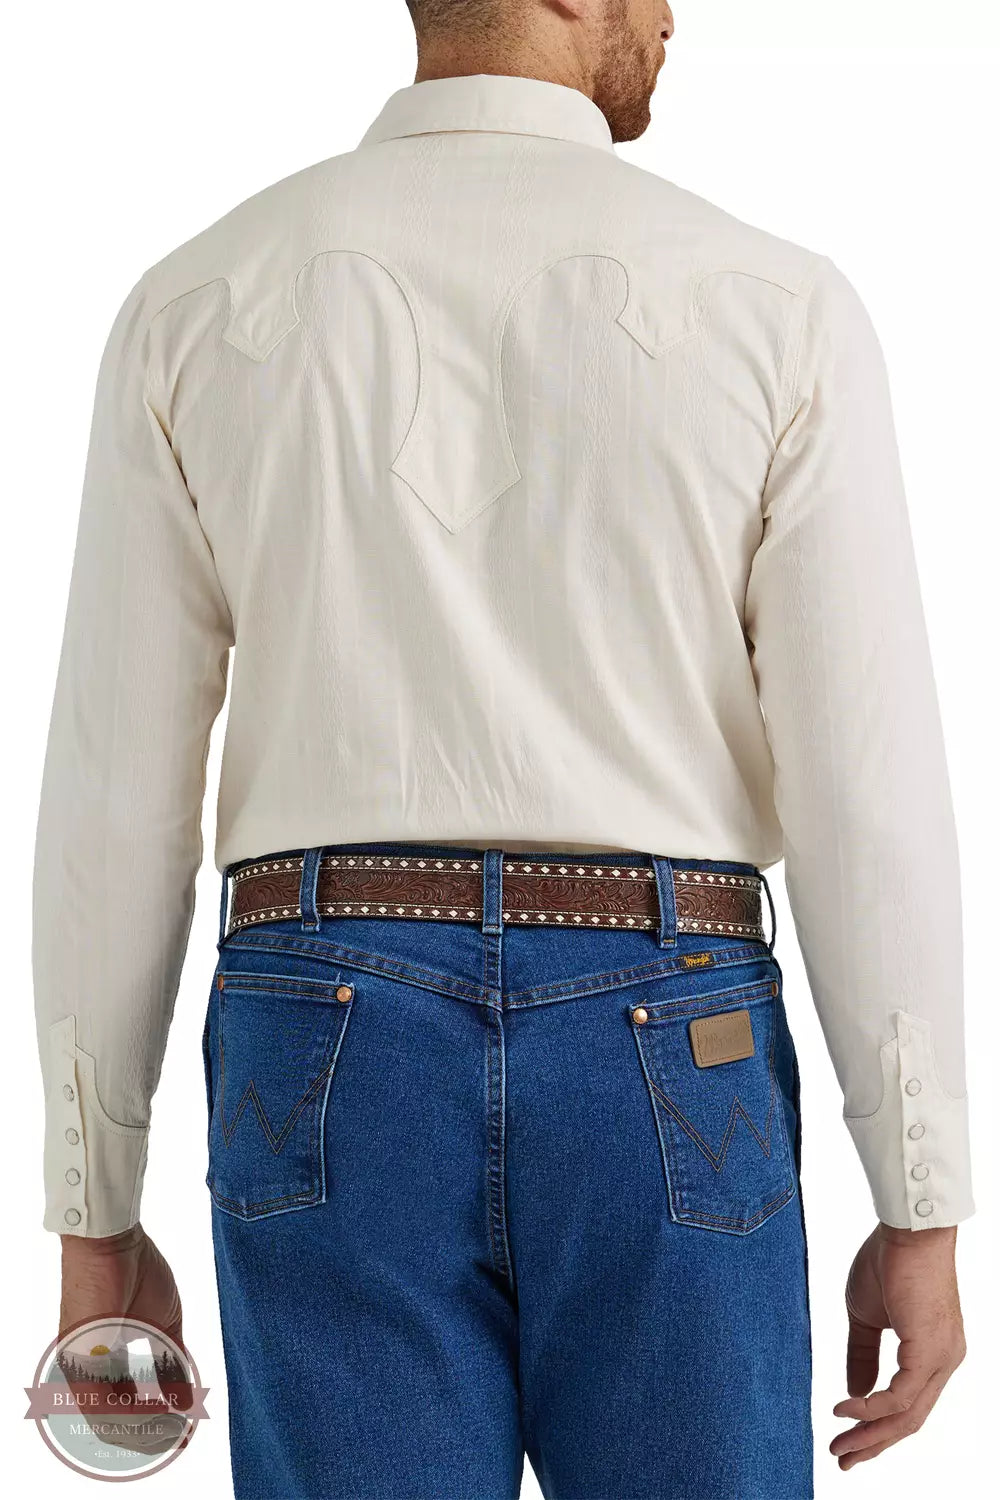 Wrangler 112345064 Rodeo Ben Long Sleeve Snap Shirt in Ivory Textured Back View